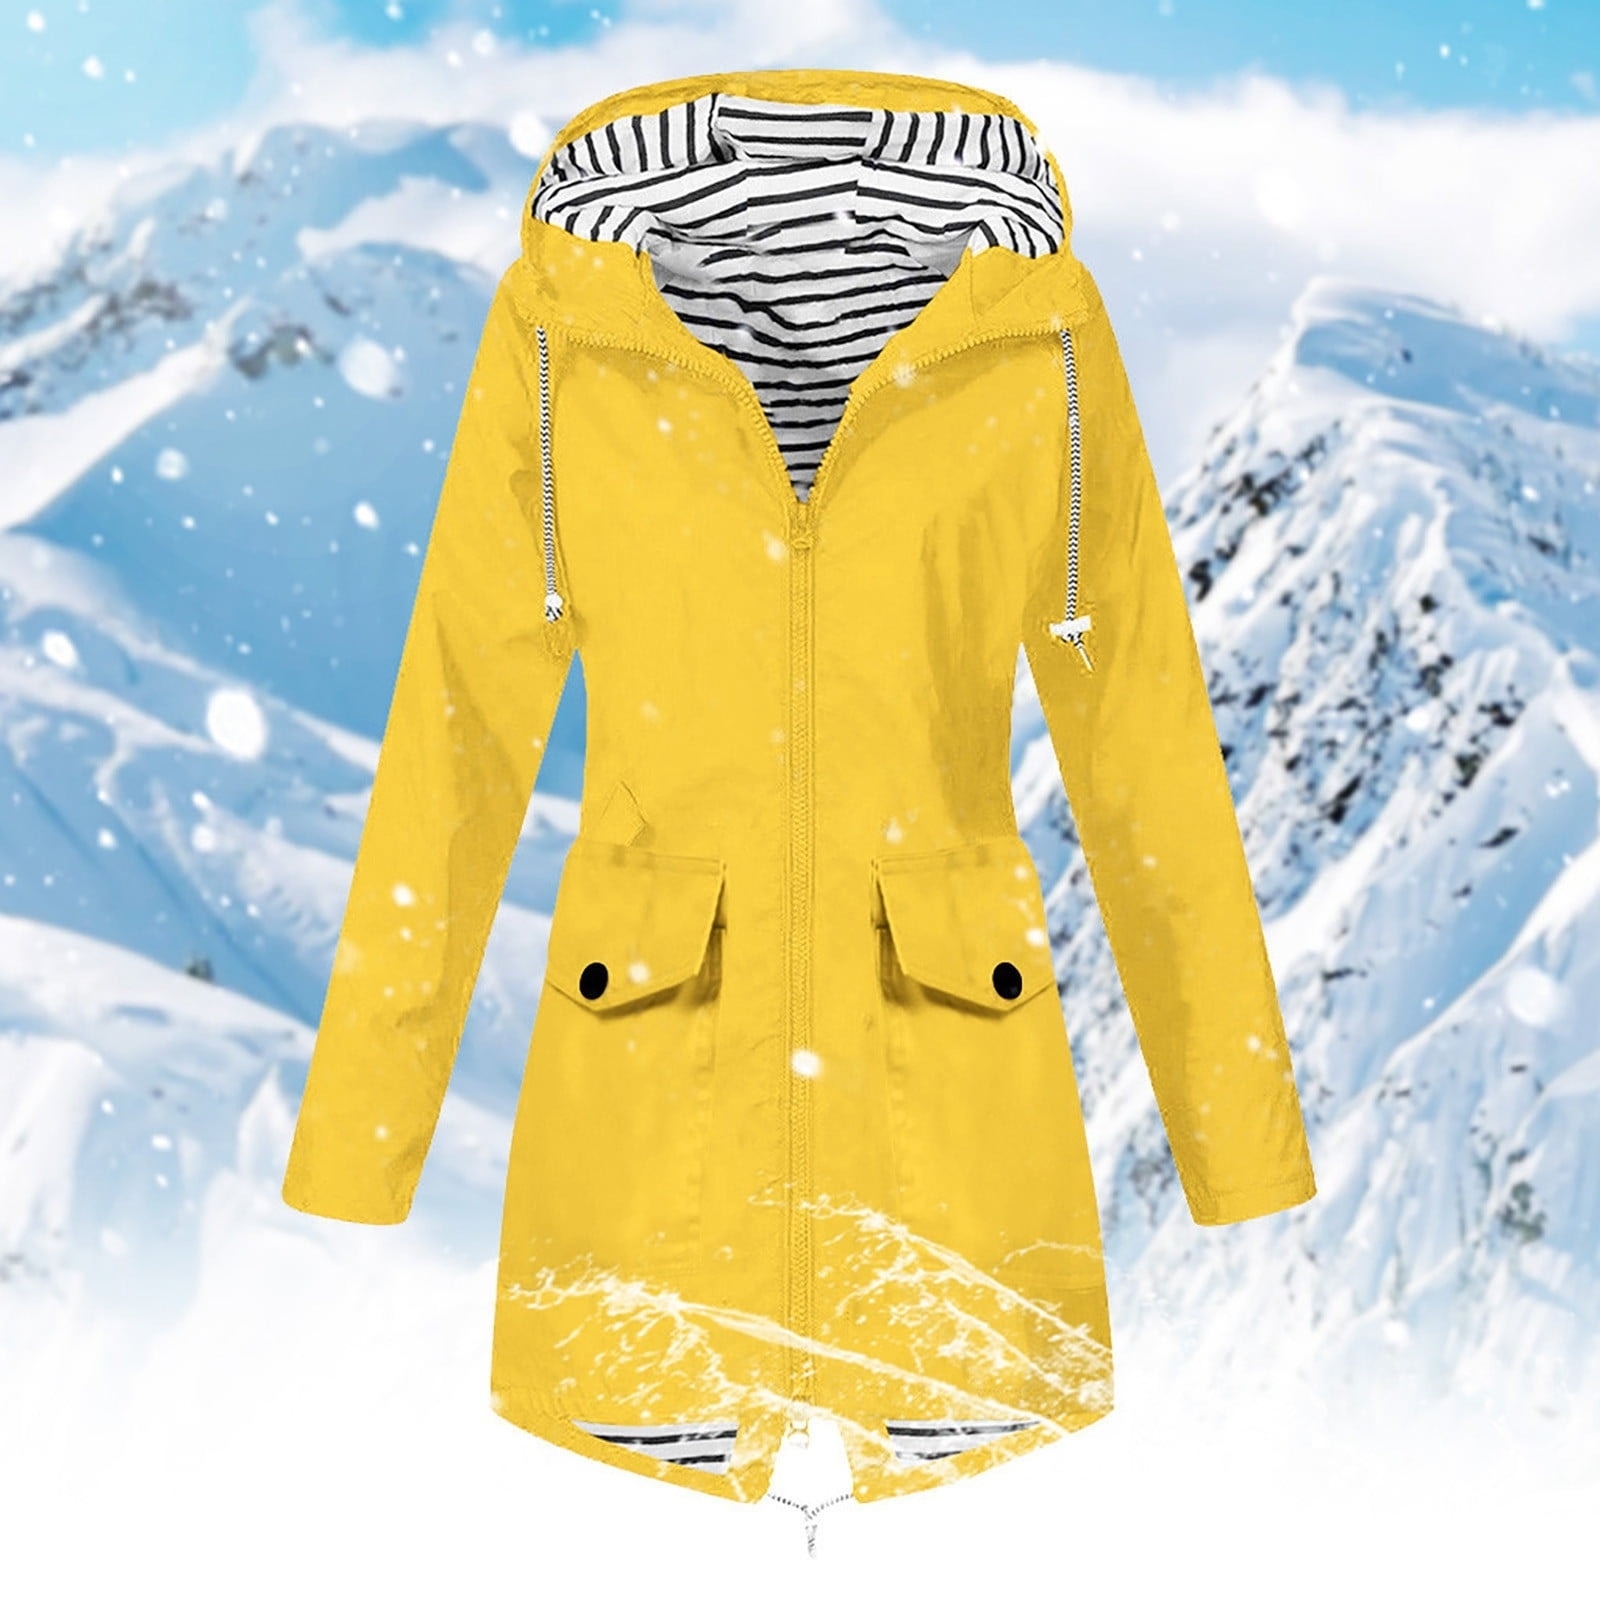 Yellow rain jacket with hood and striped lining displayed against a snowy mountain backdrop